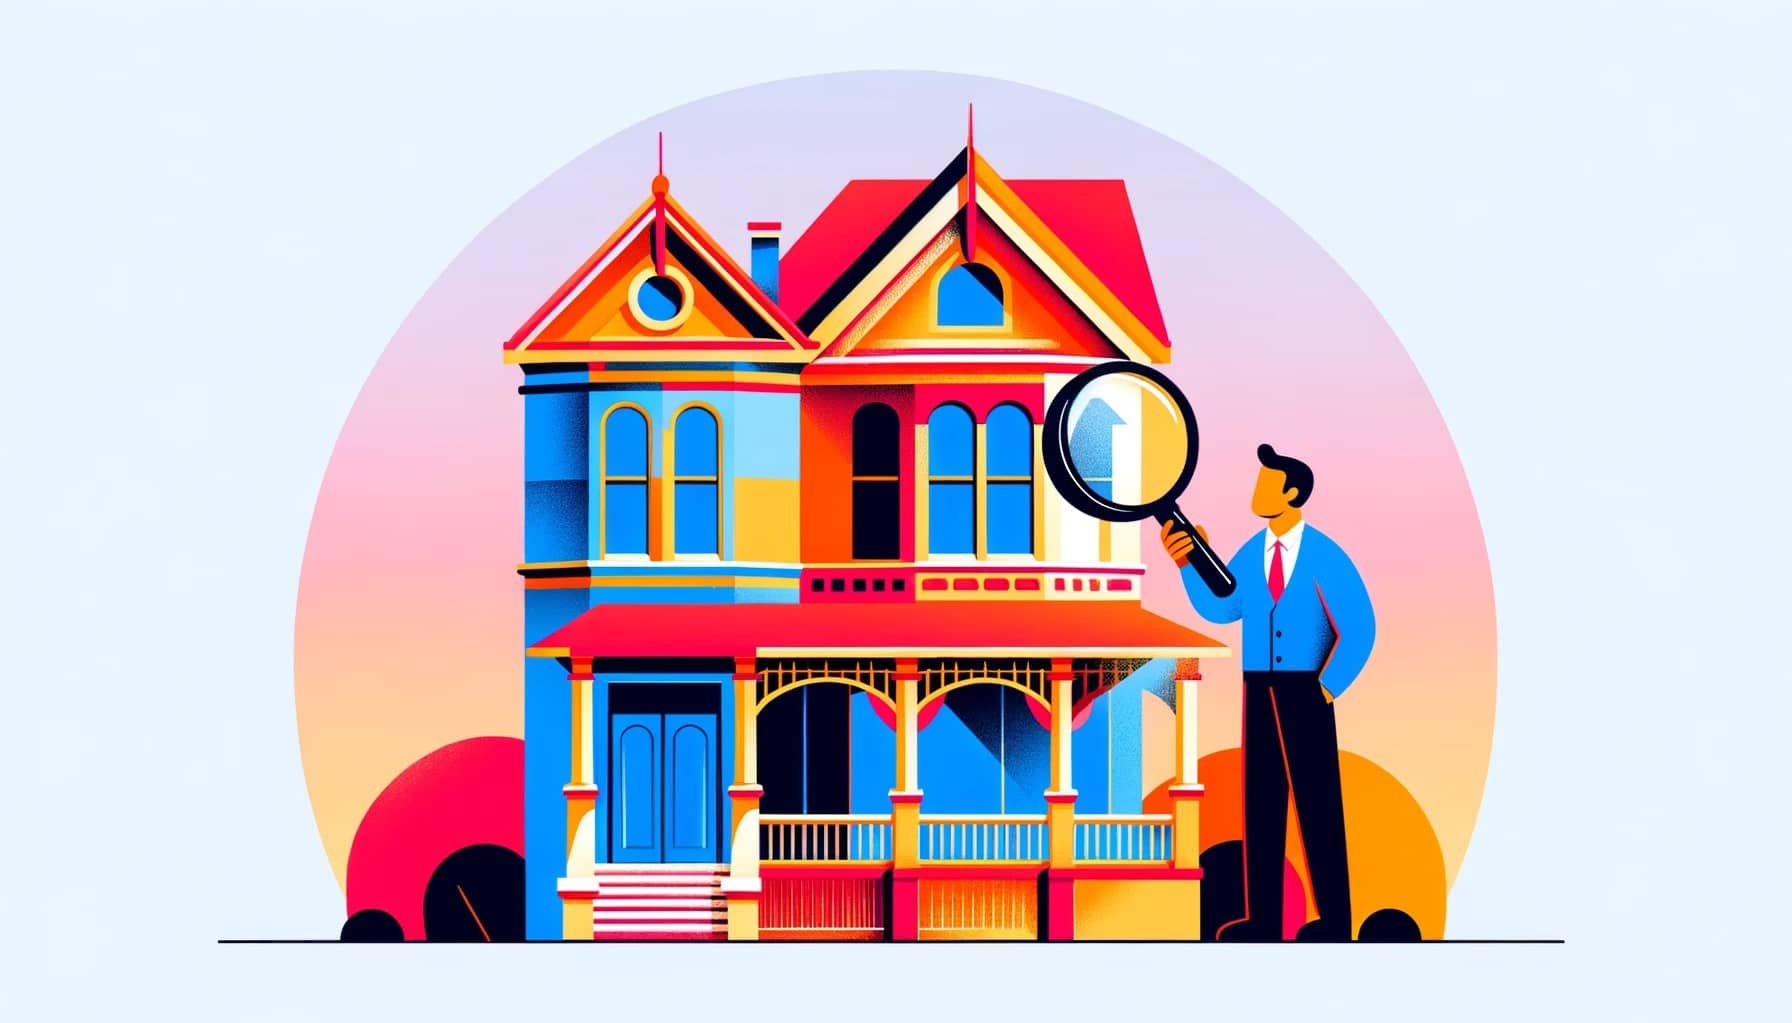 Minimalist illustration of a person using a magnifying glass to examine a colorful San Francisco Victorian home, symbolizing in-depth property research.